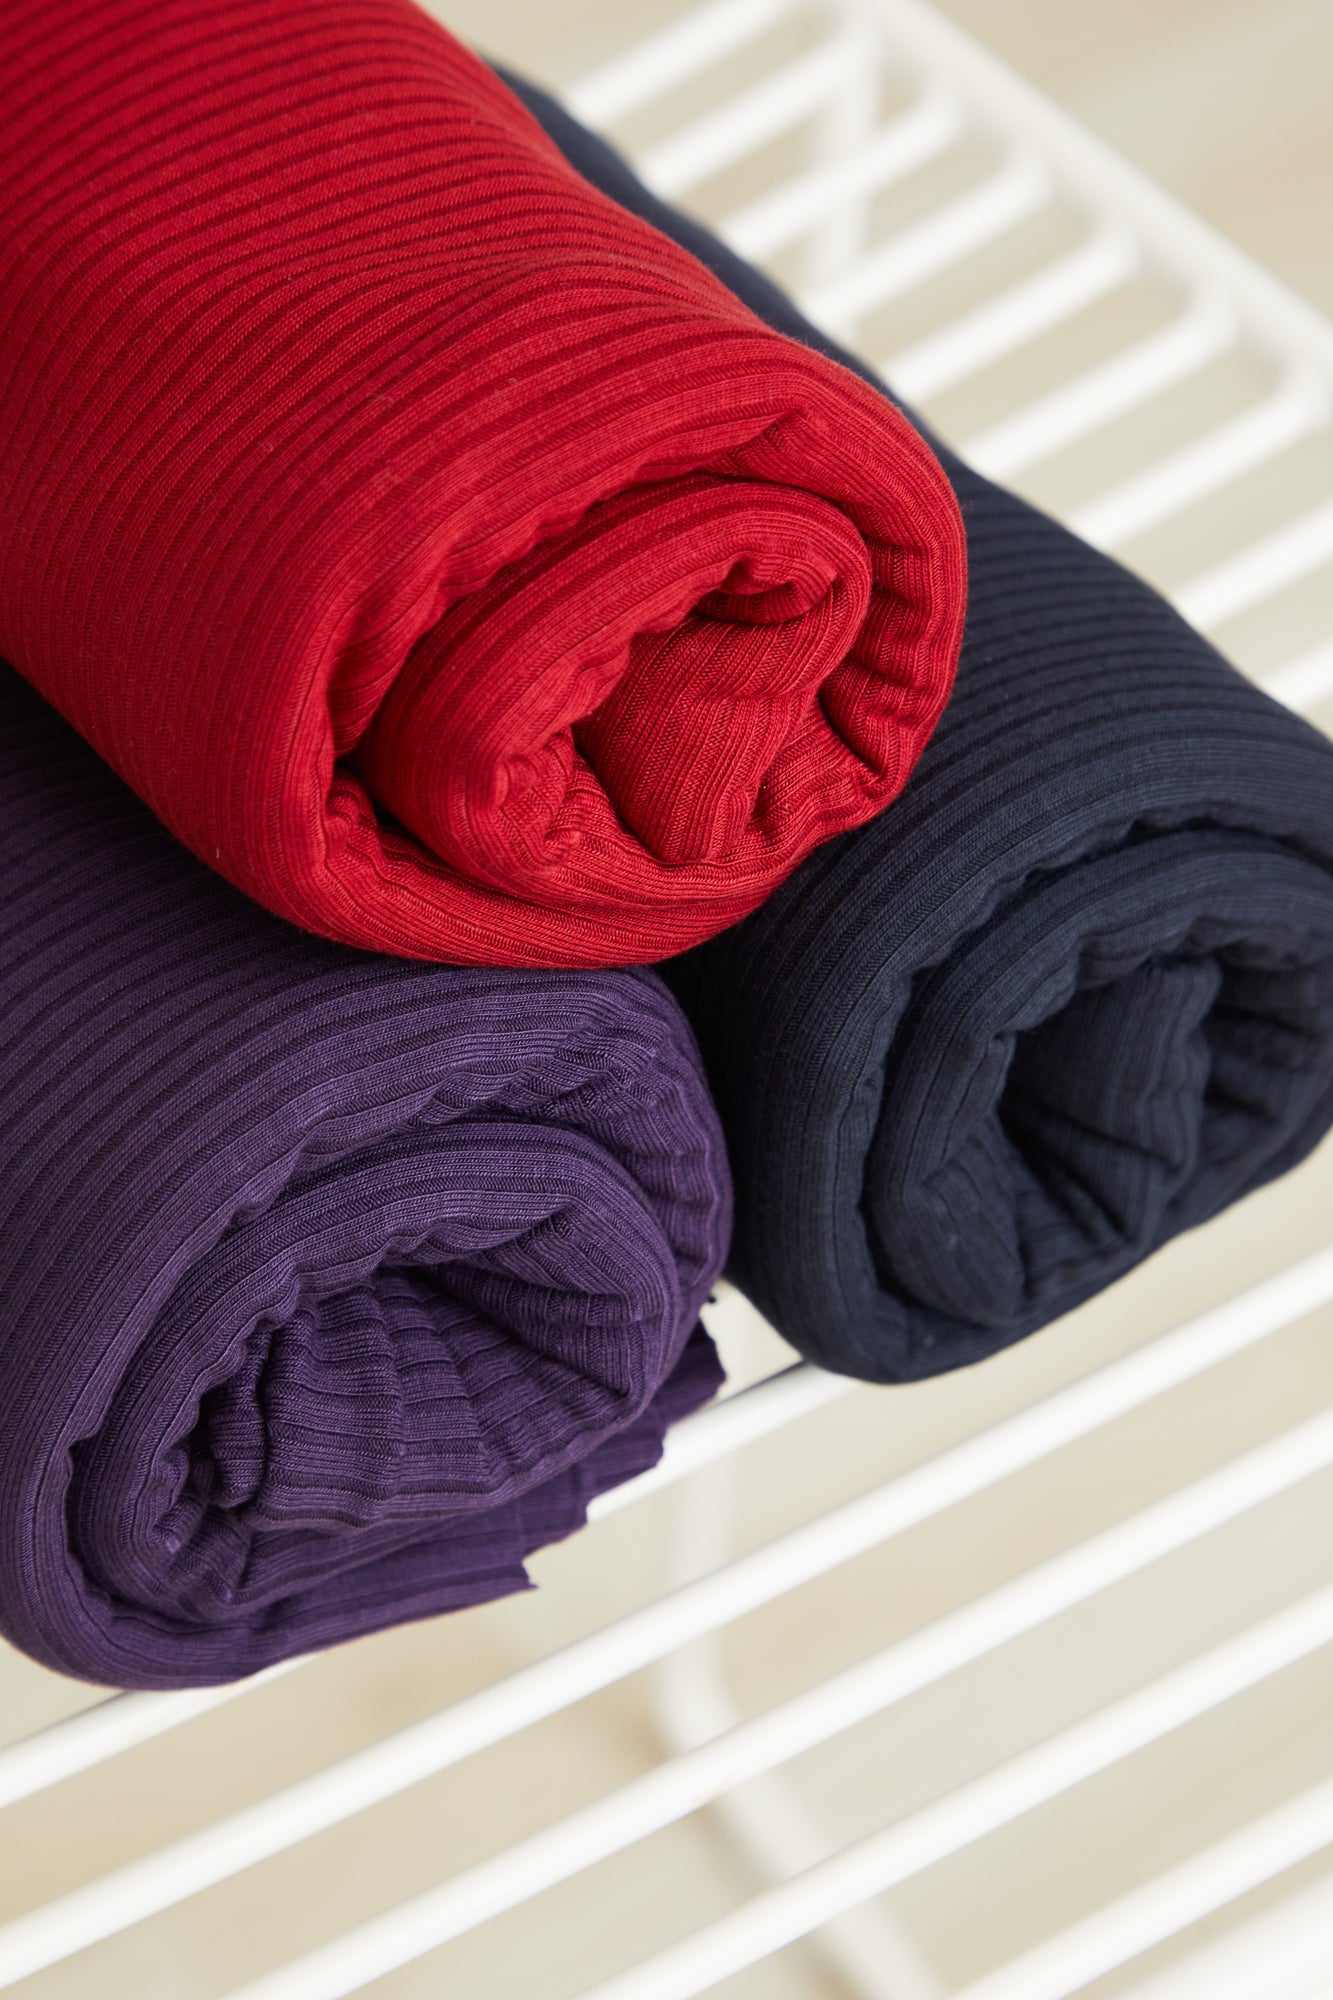 REMNANT 1.3 Metres - Derby Ribbed Jersey Purple Night with TENCEL™ Modal Fibres